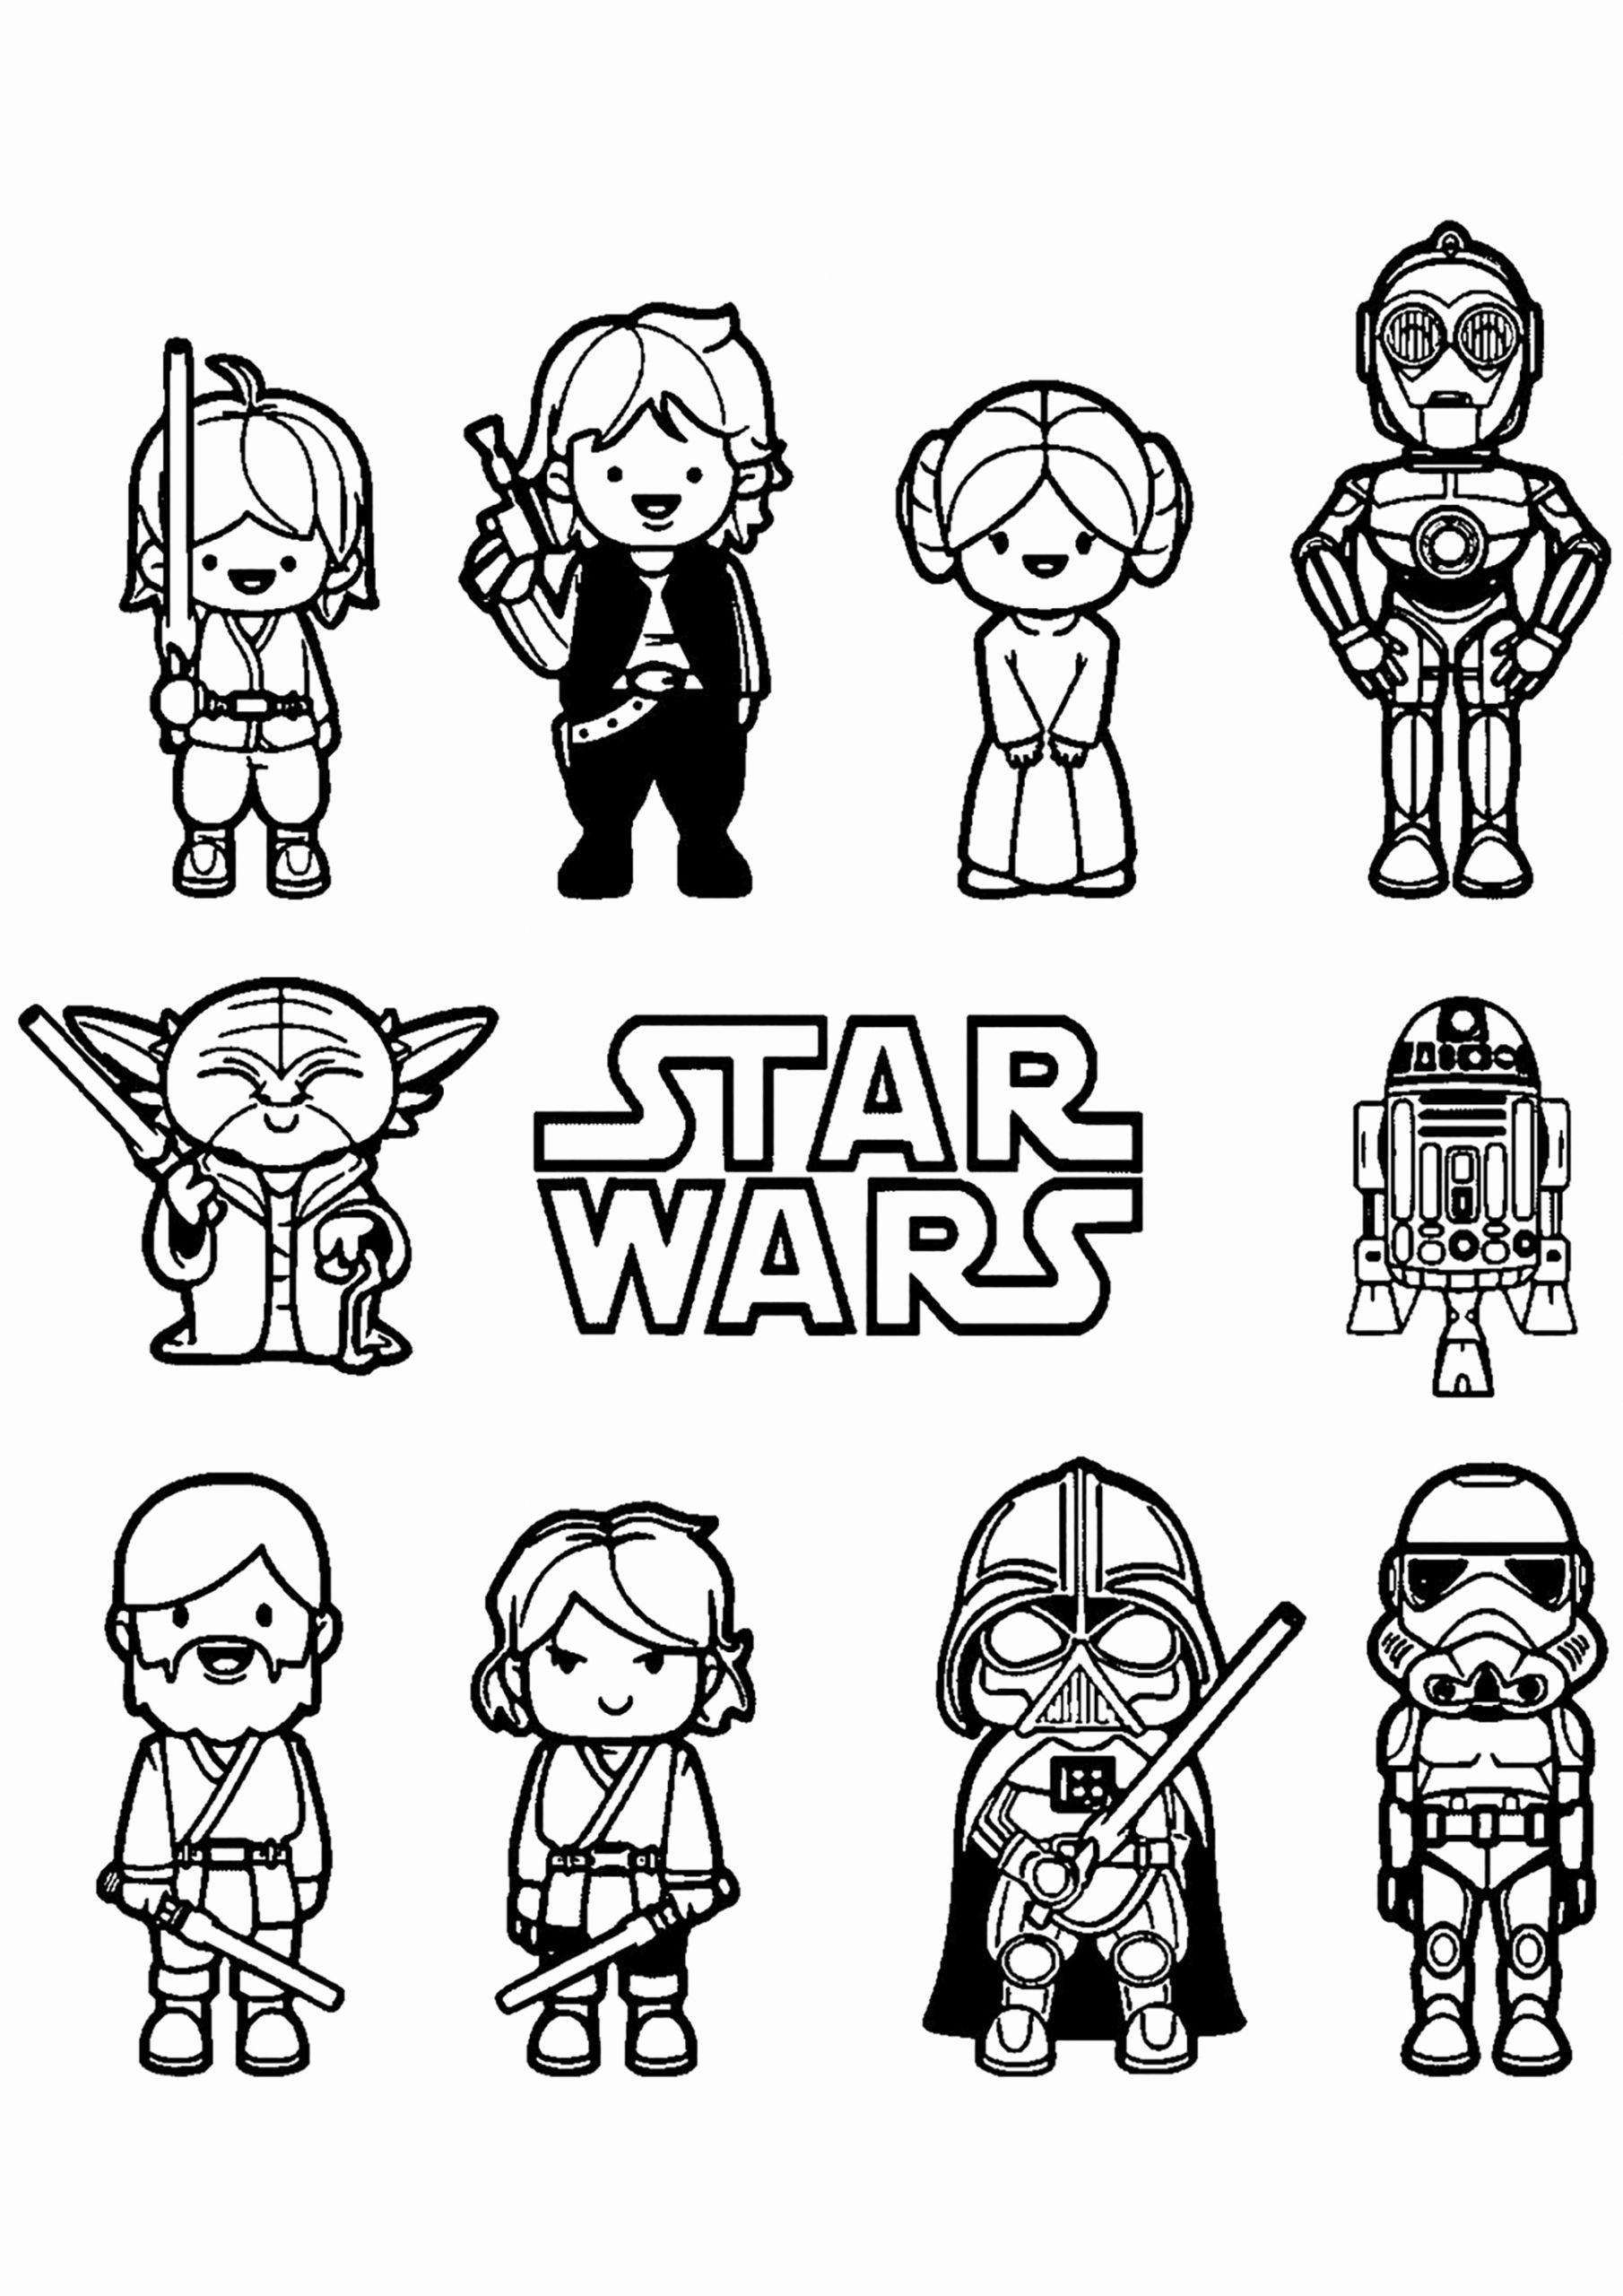 Star Wars Prints | Star Wars Gifts 2020 | Star Wars Coloring Book, Star pour Lego Star Wars Coloriage